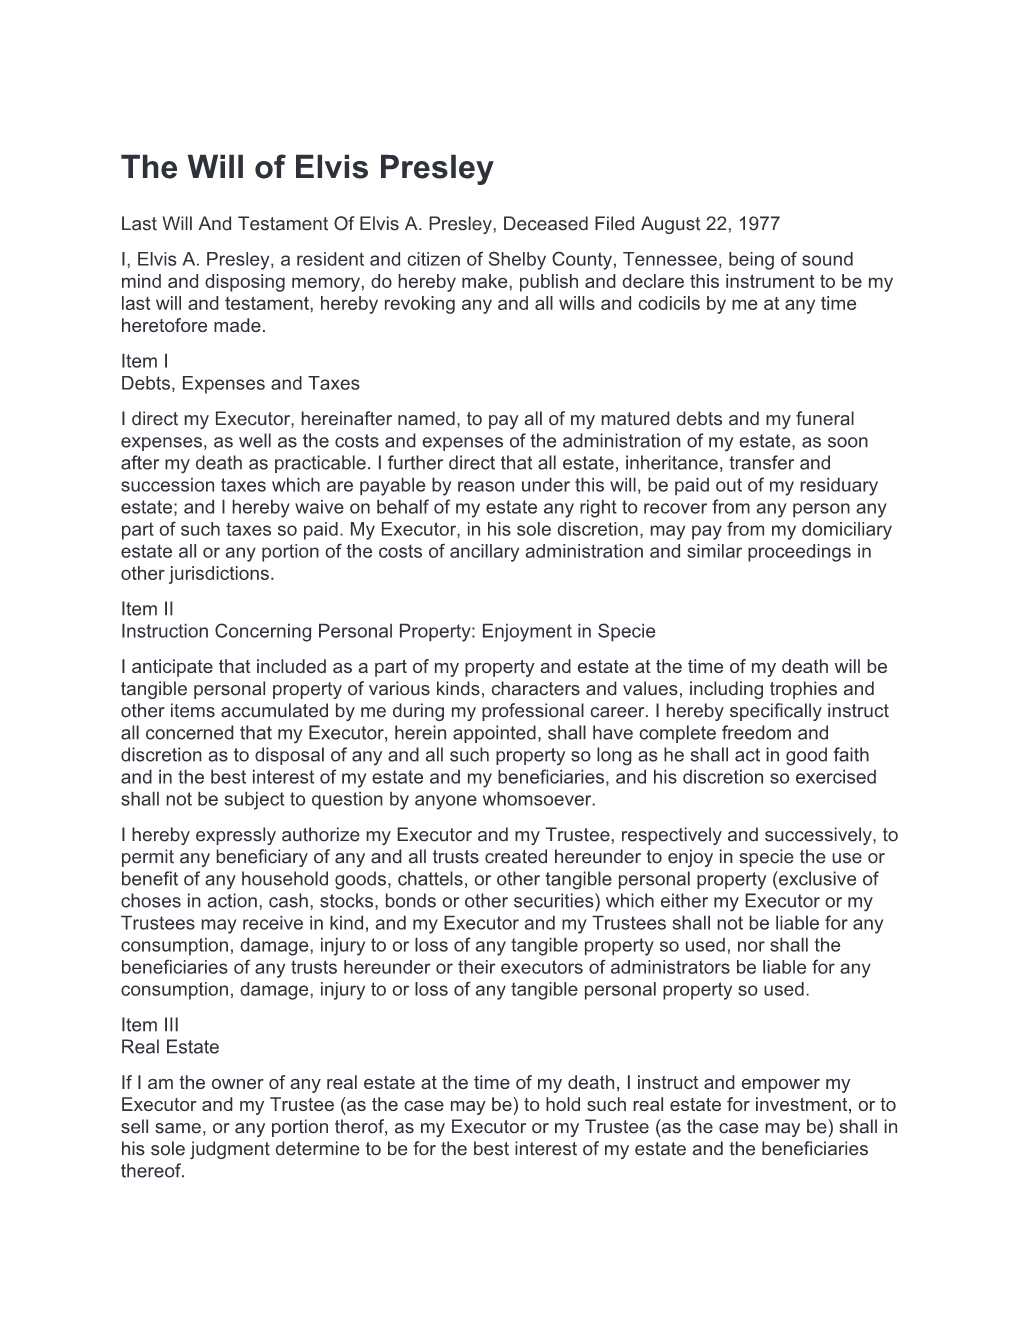 The Will of Elvis Presley